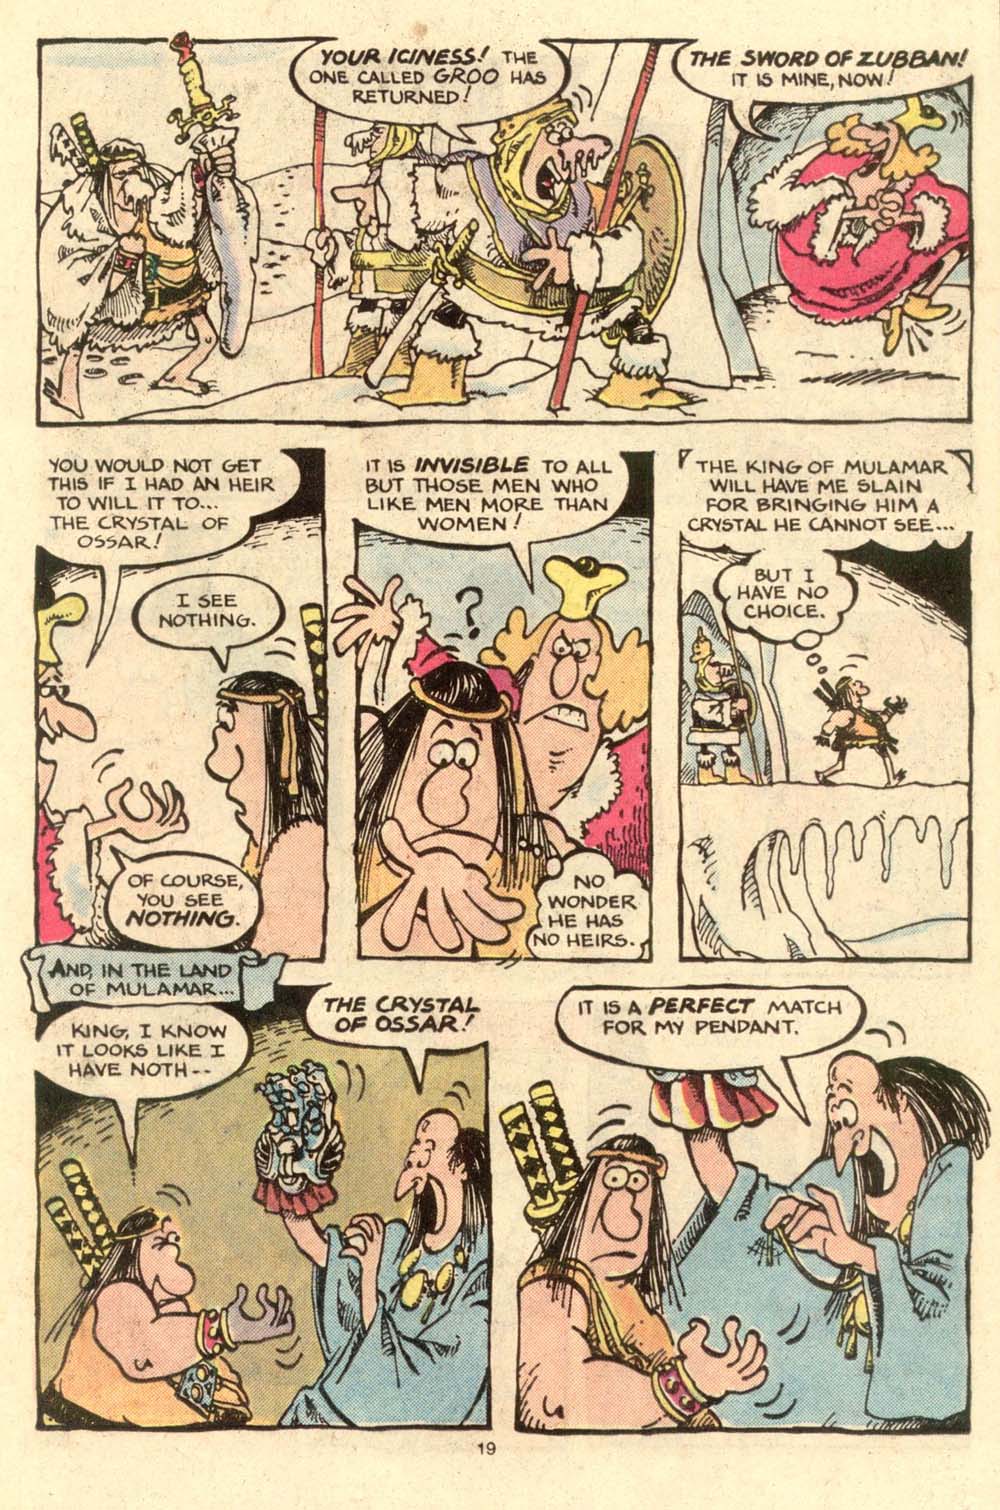 Read online Groo the Wanderer comic -  Issue #4 - 20